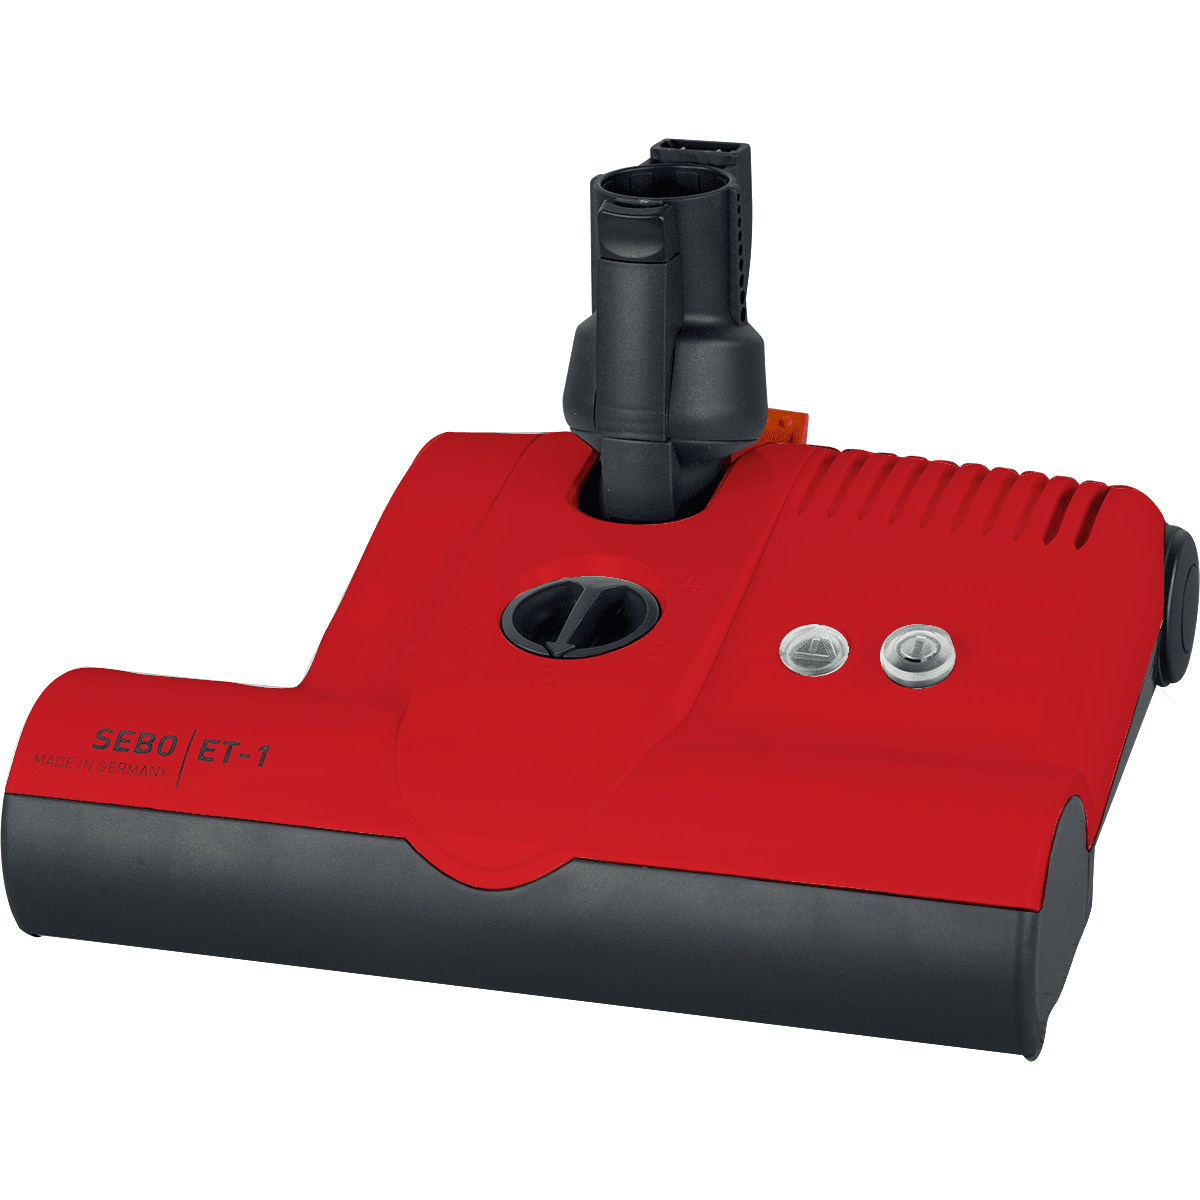 Sebo Et-1 Power Head For K3 And D4 Canister Vacuums - Red